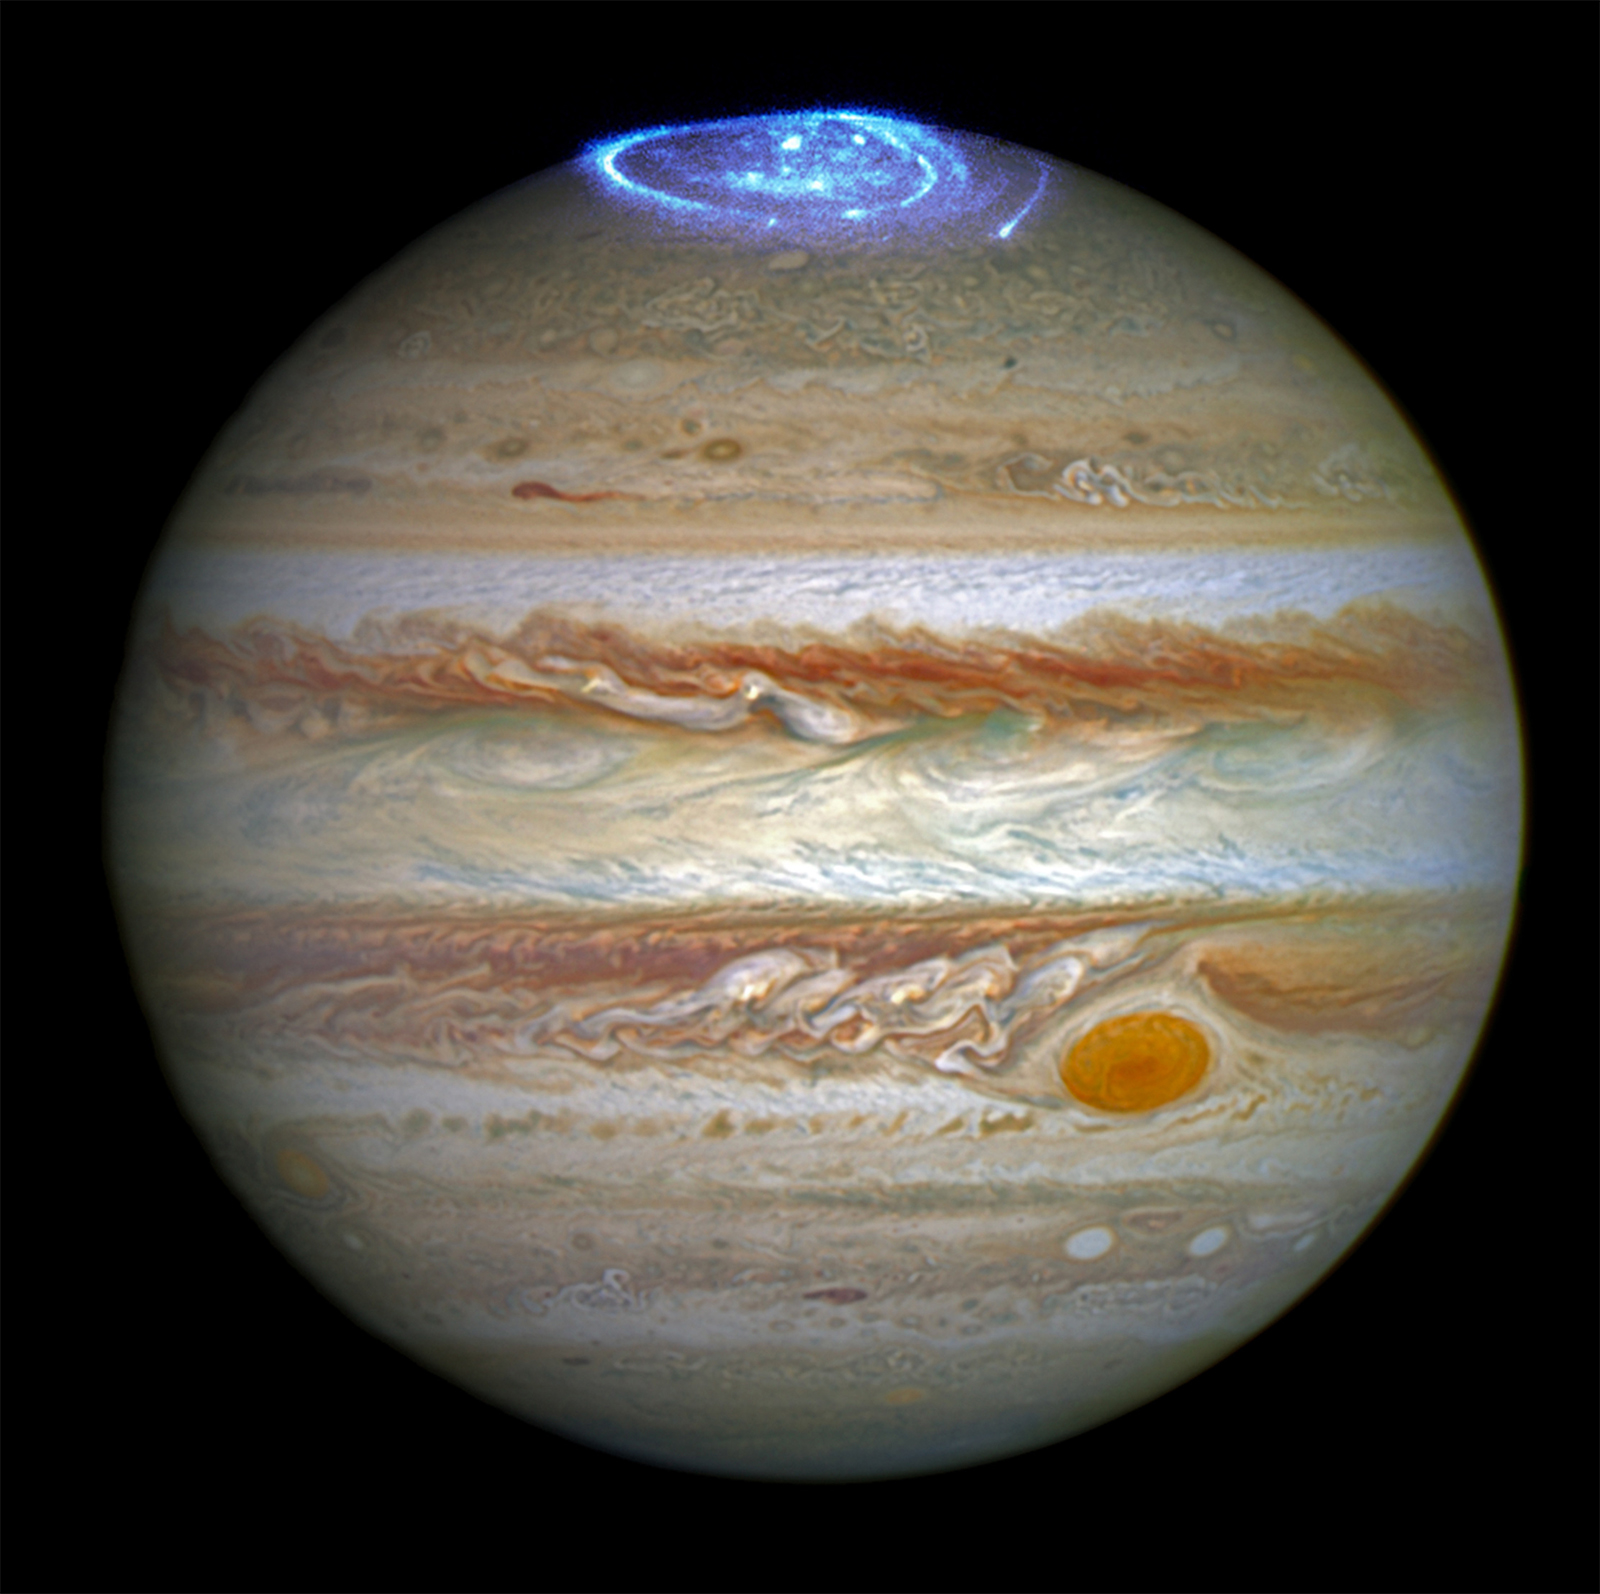 Jupiter is topped with a glowing blue aurora in this enhanced, full-disk image of the gas giant planet.